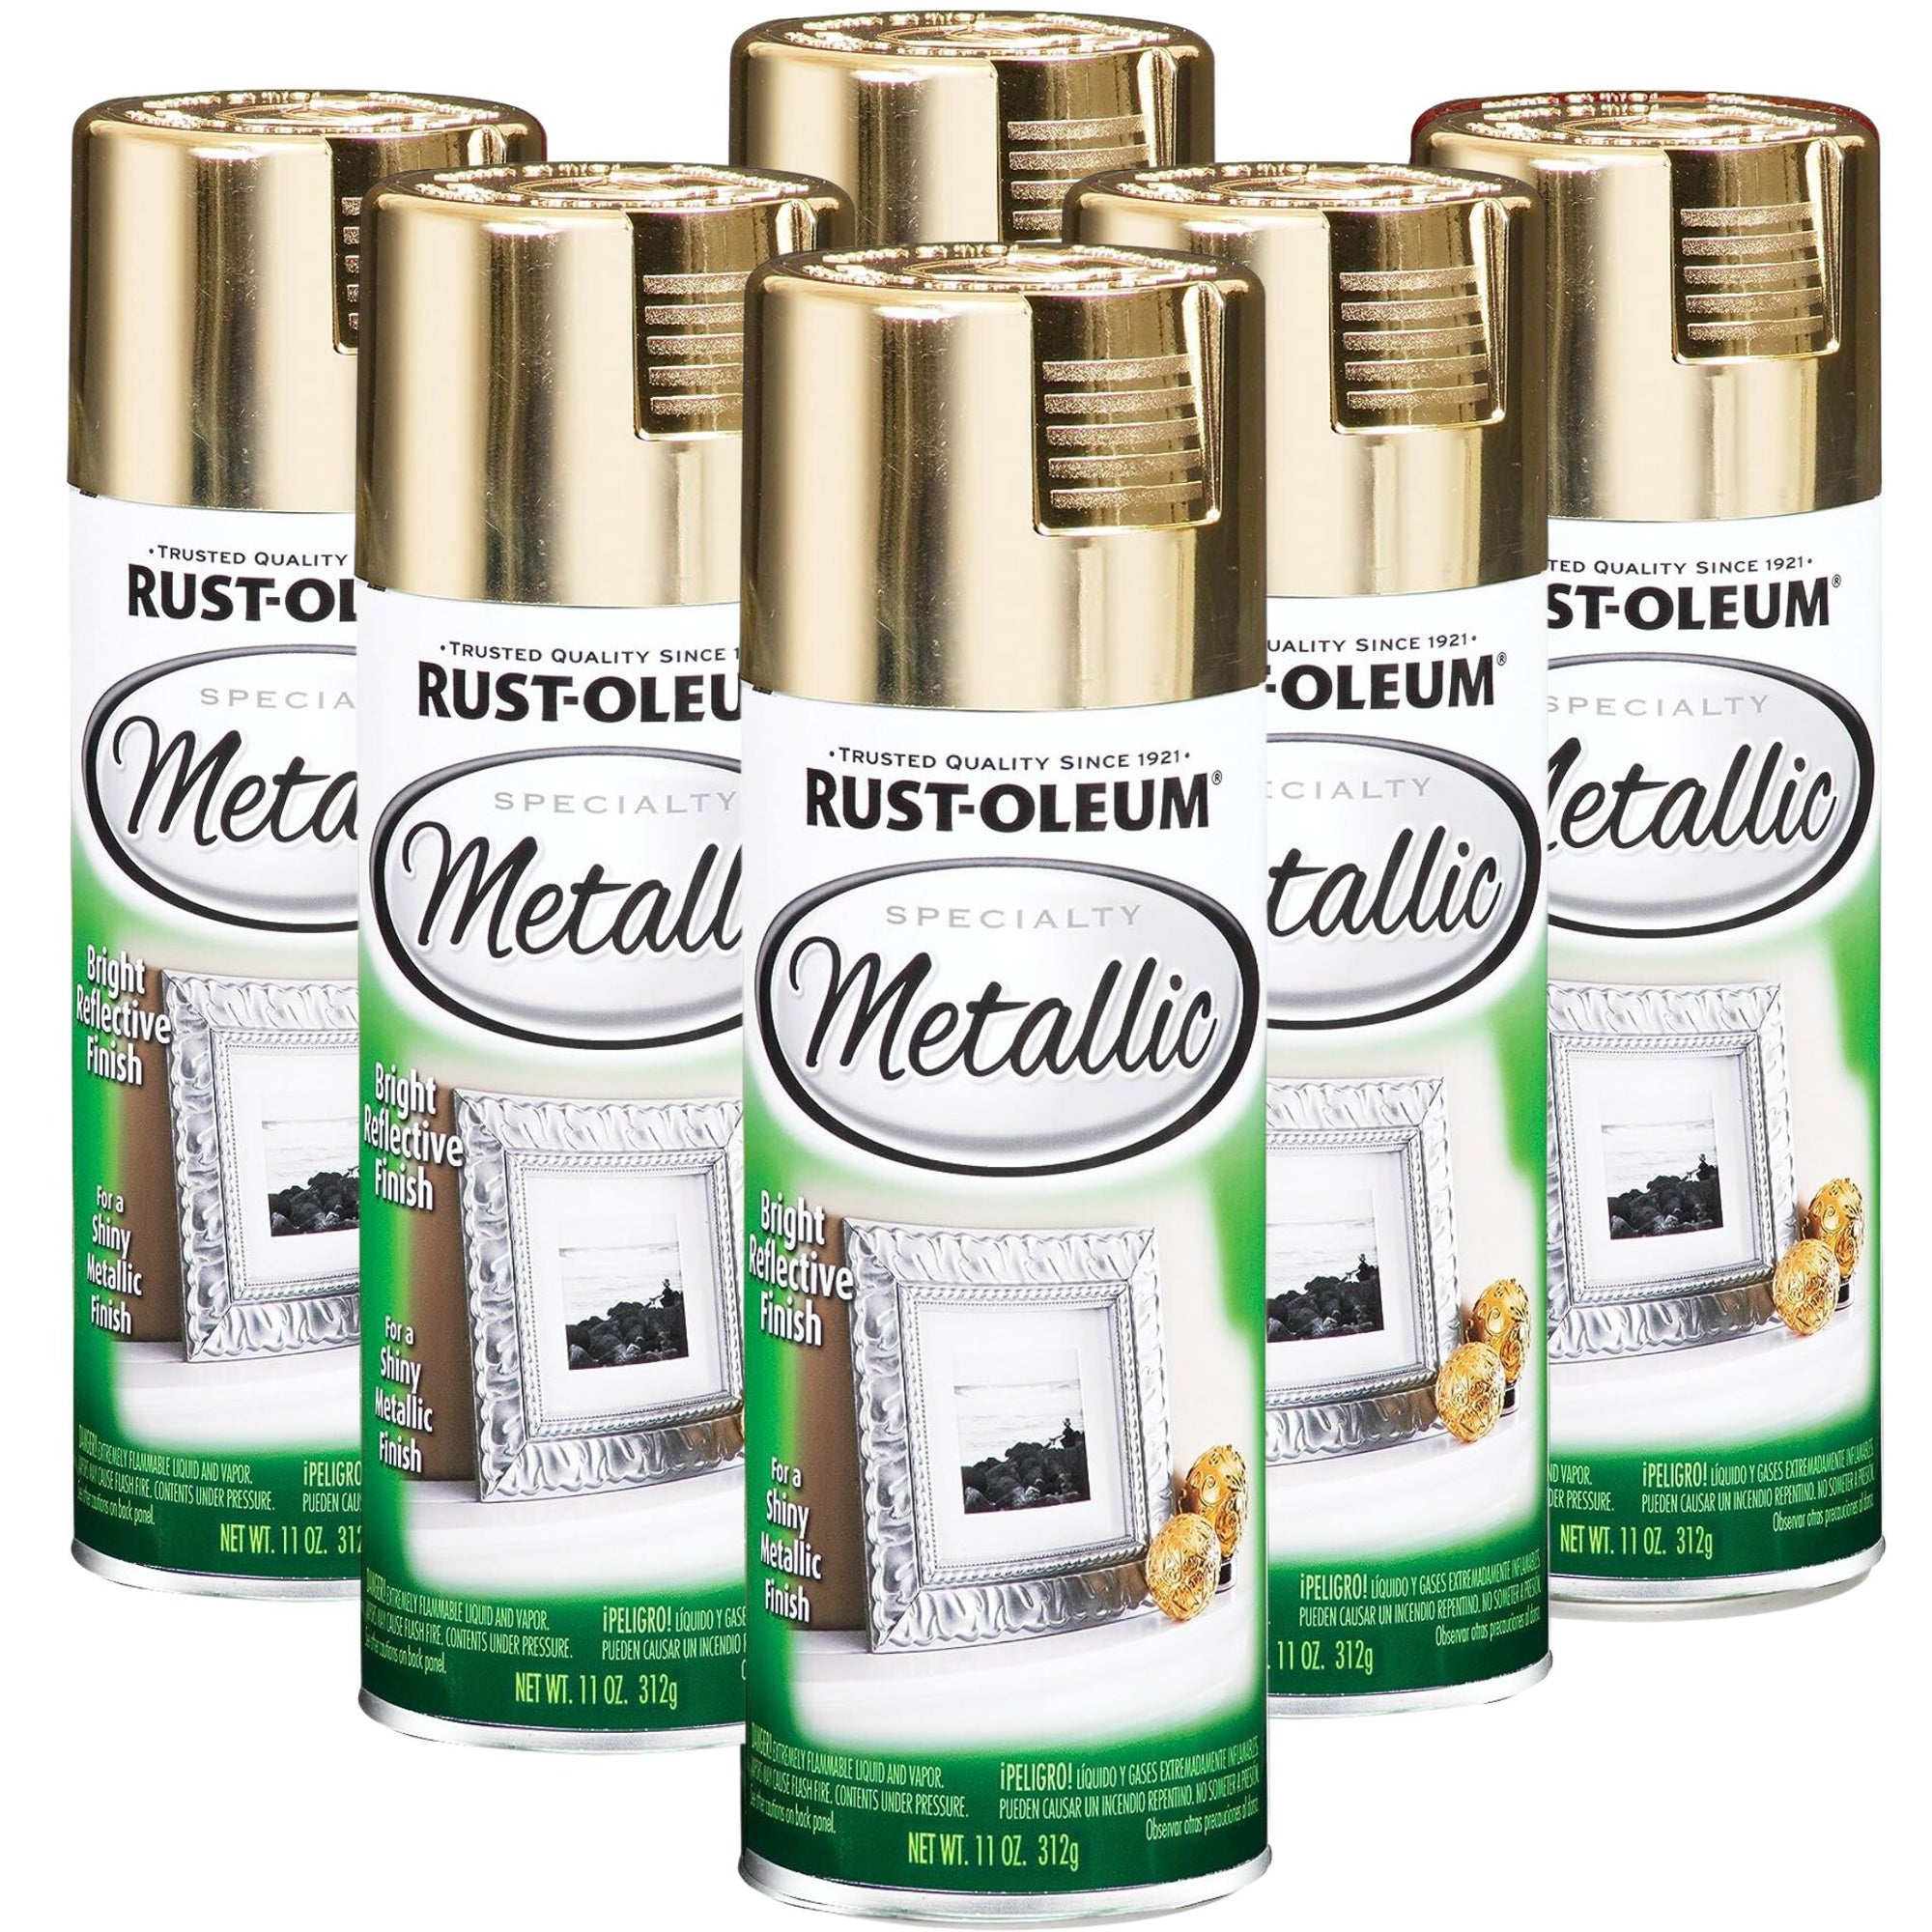 6 Cans | Rust-Oleum Speciality Metallic Bright Reflective Finish - 312g Spray | 1910830 METALLIC GOLD - South East Clearance Centre